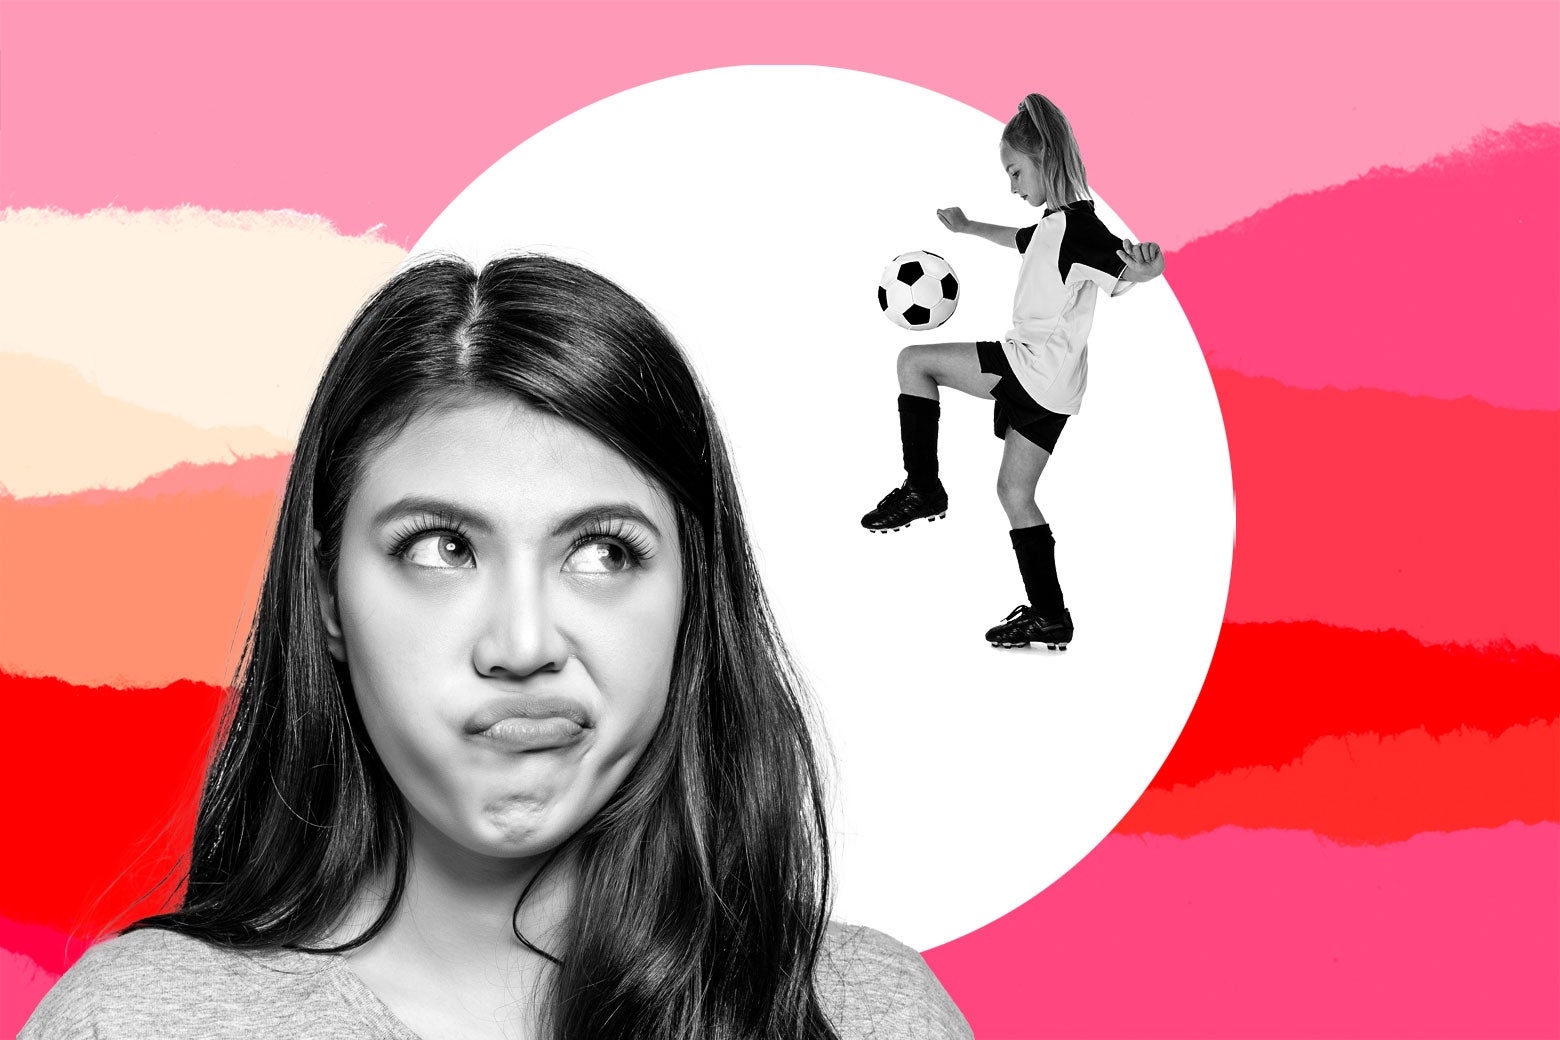 A woman looks perturbed at a teen girl playing soccer.